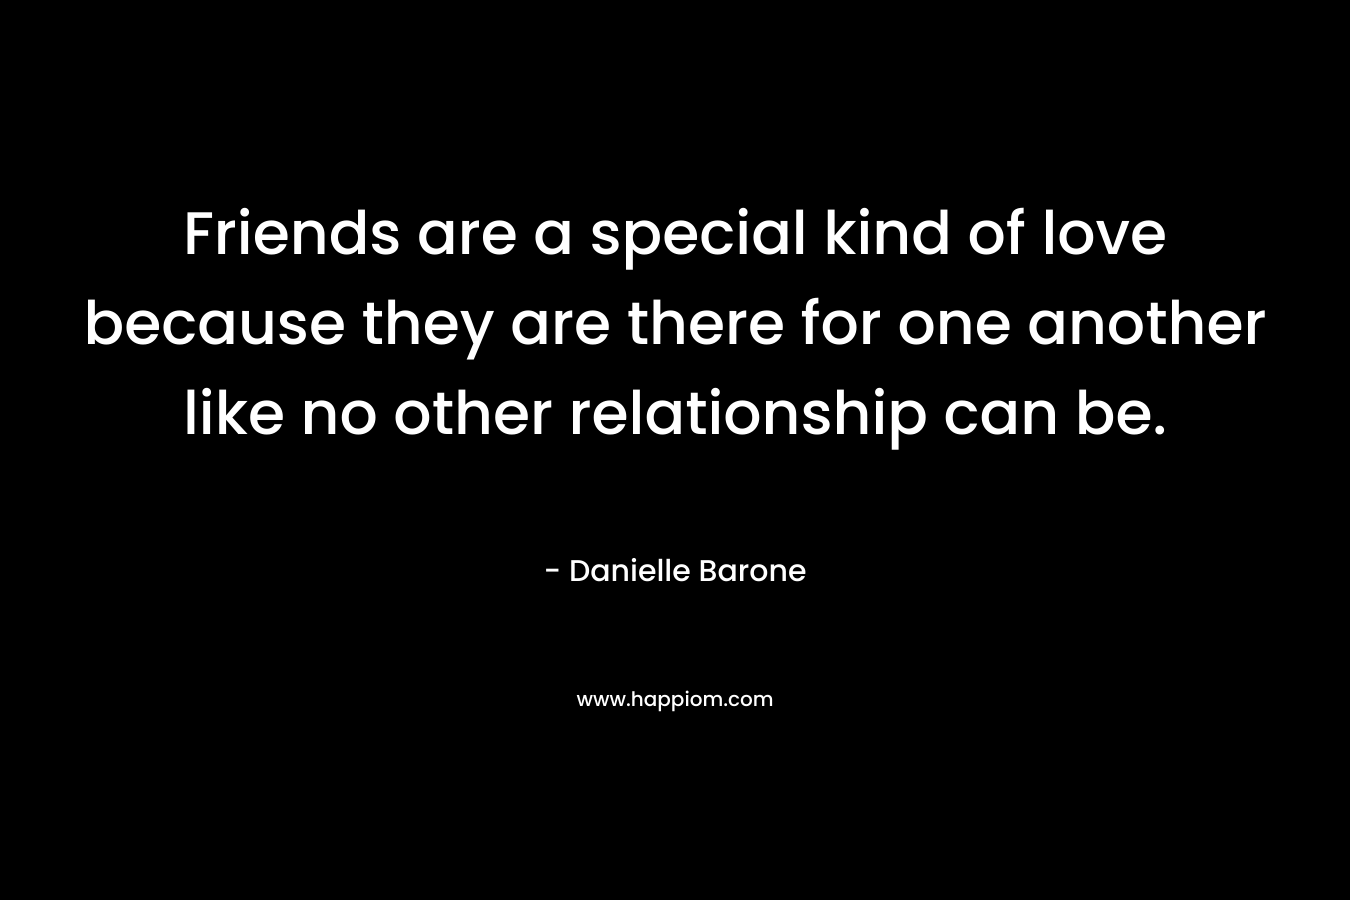 Friends are a special kind of love because they are there for one another like no other relationship can be. – Danielle Barone